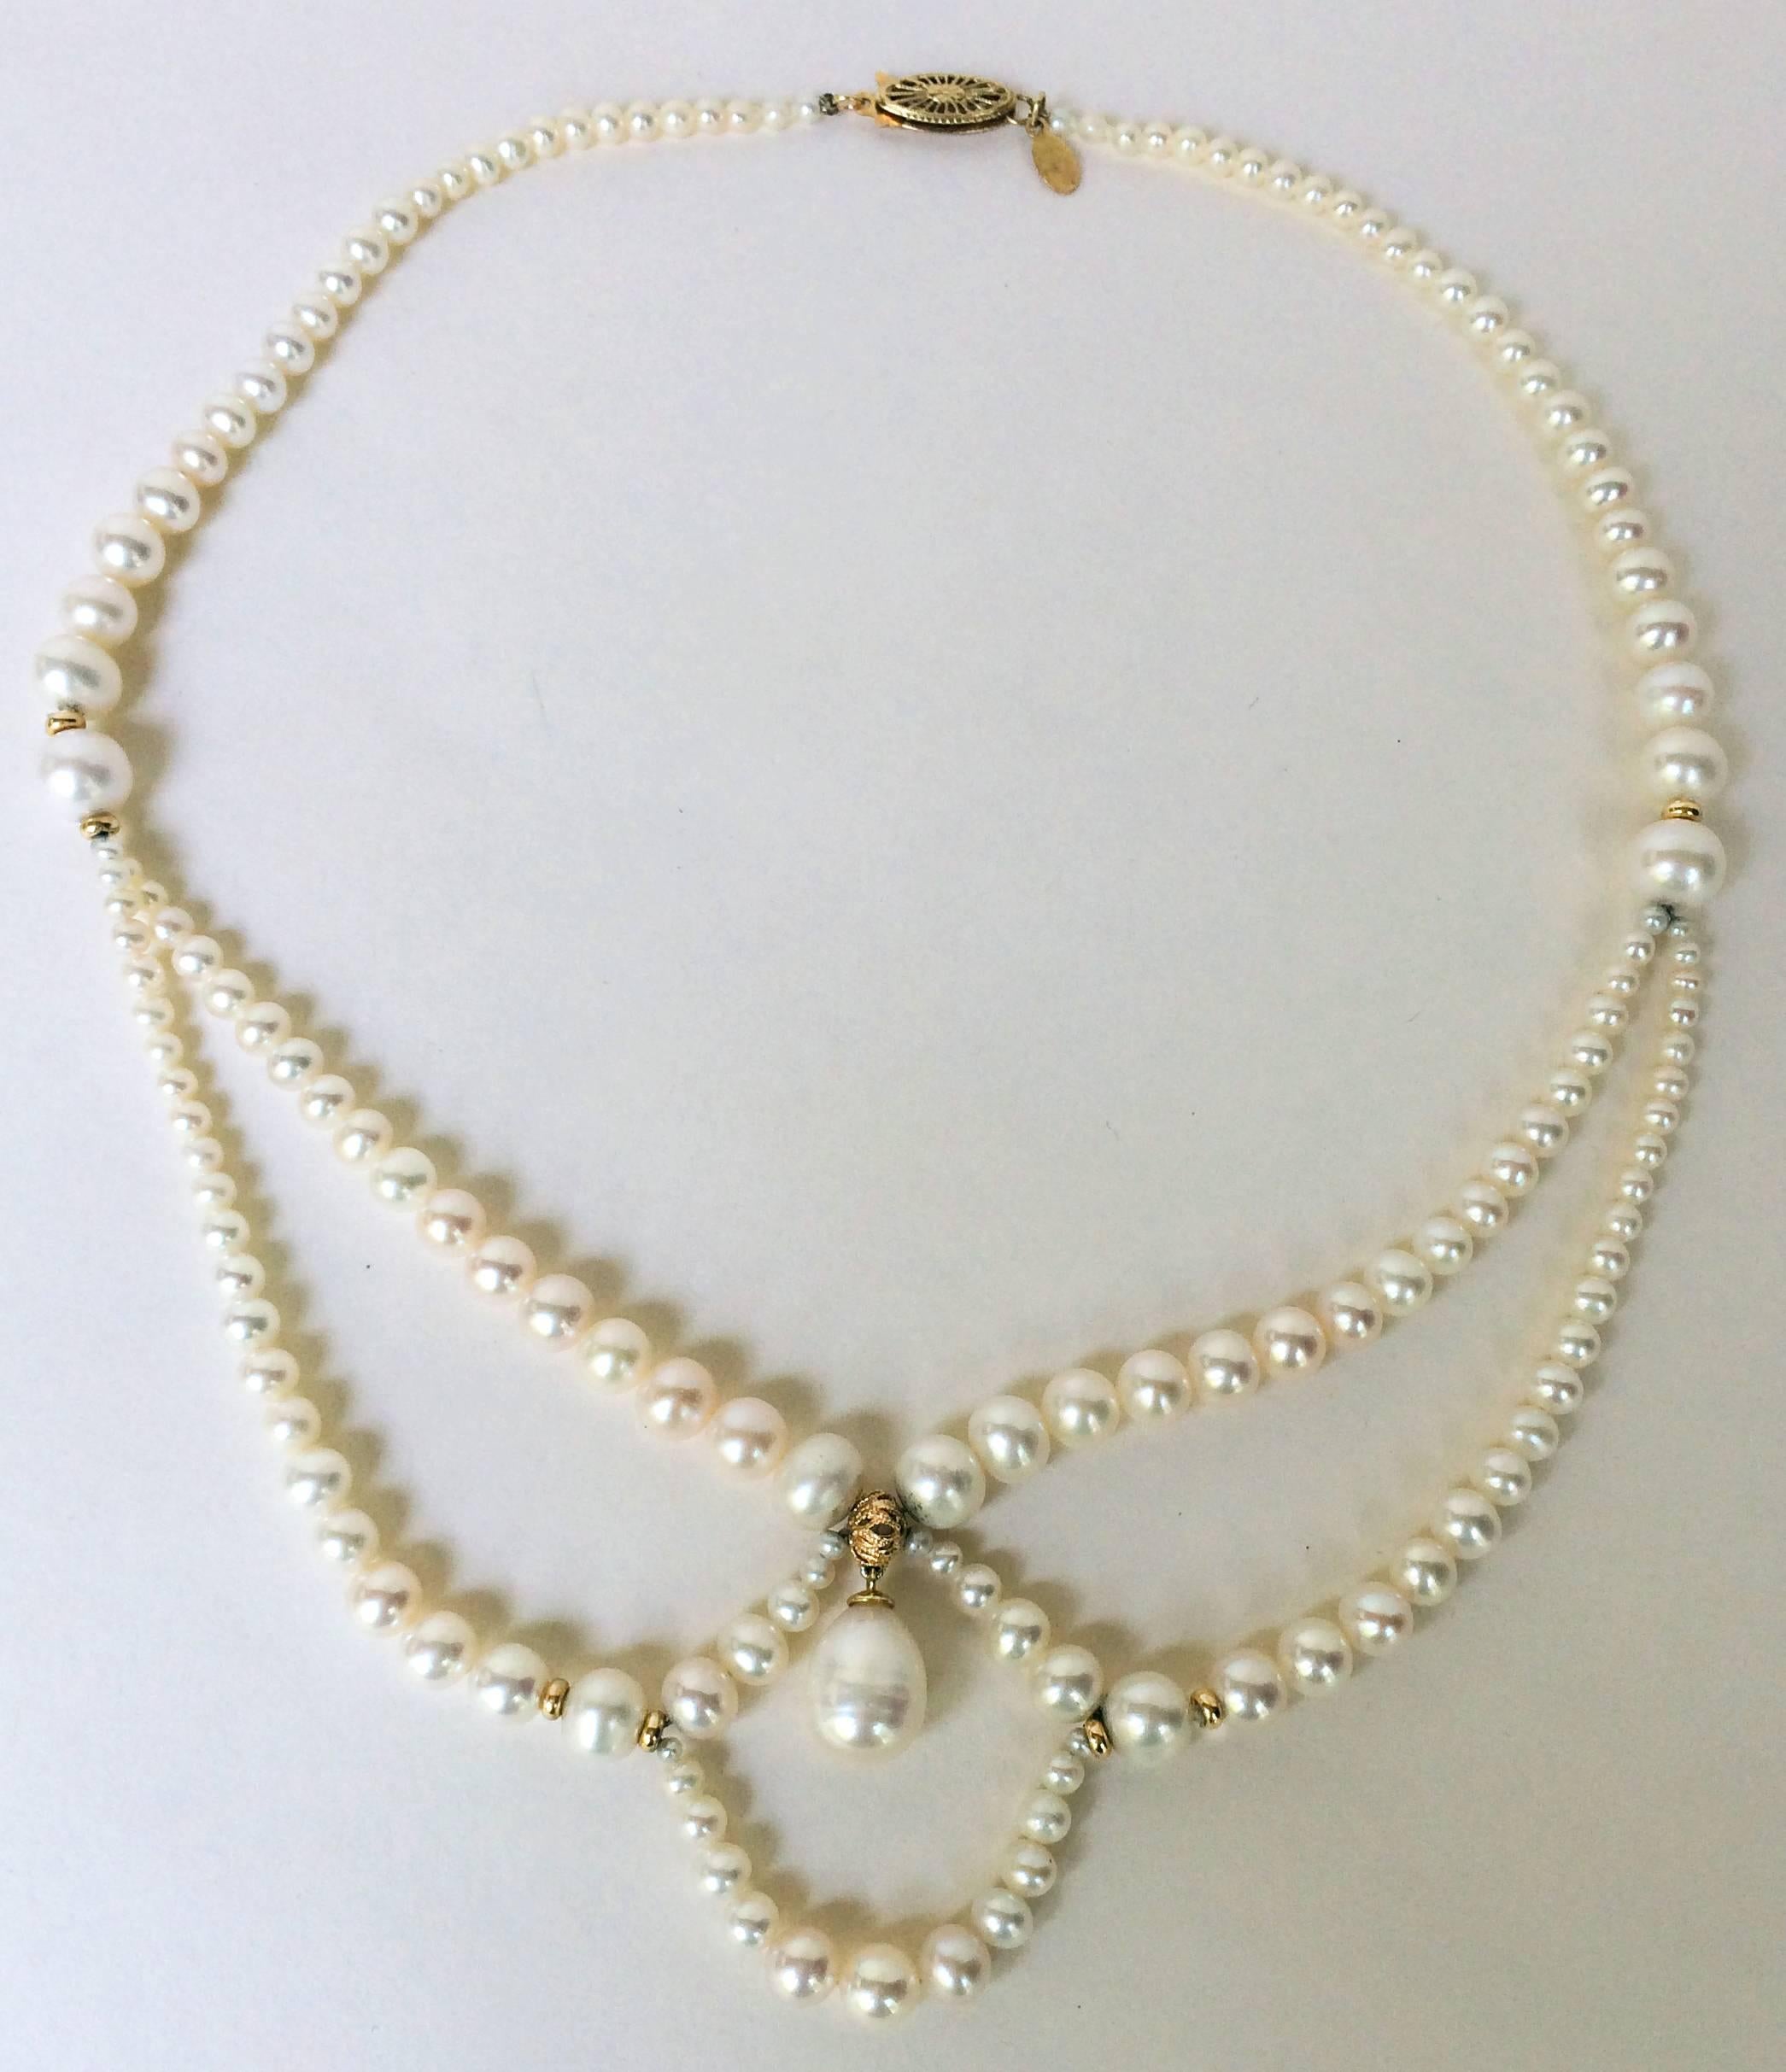 Women's Graduated Pearl Draped Necklace with 14 Karat Gold Beads and Clasp by Marina J